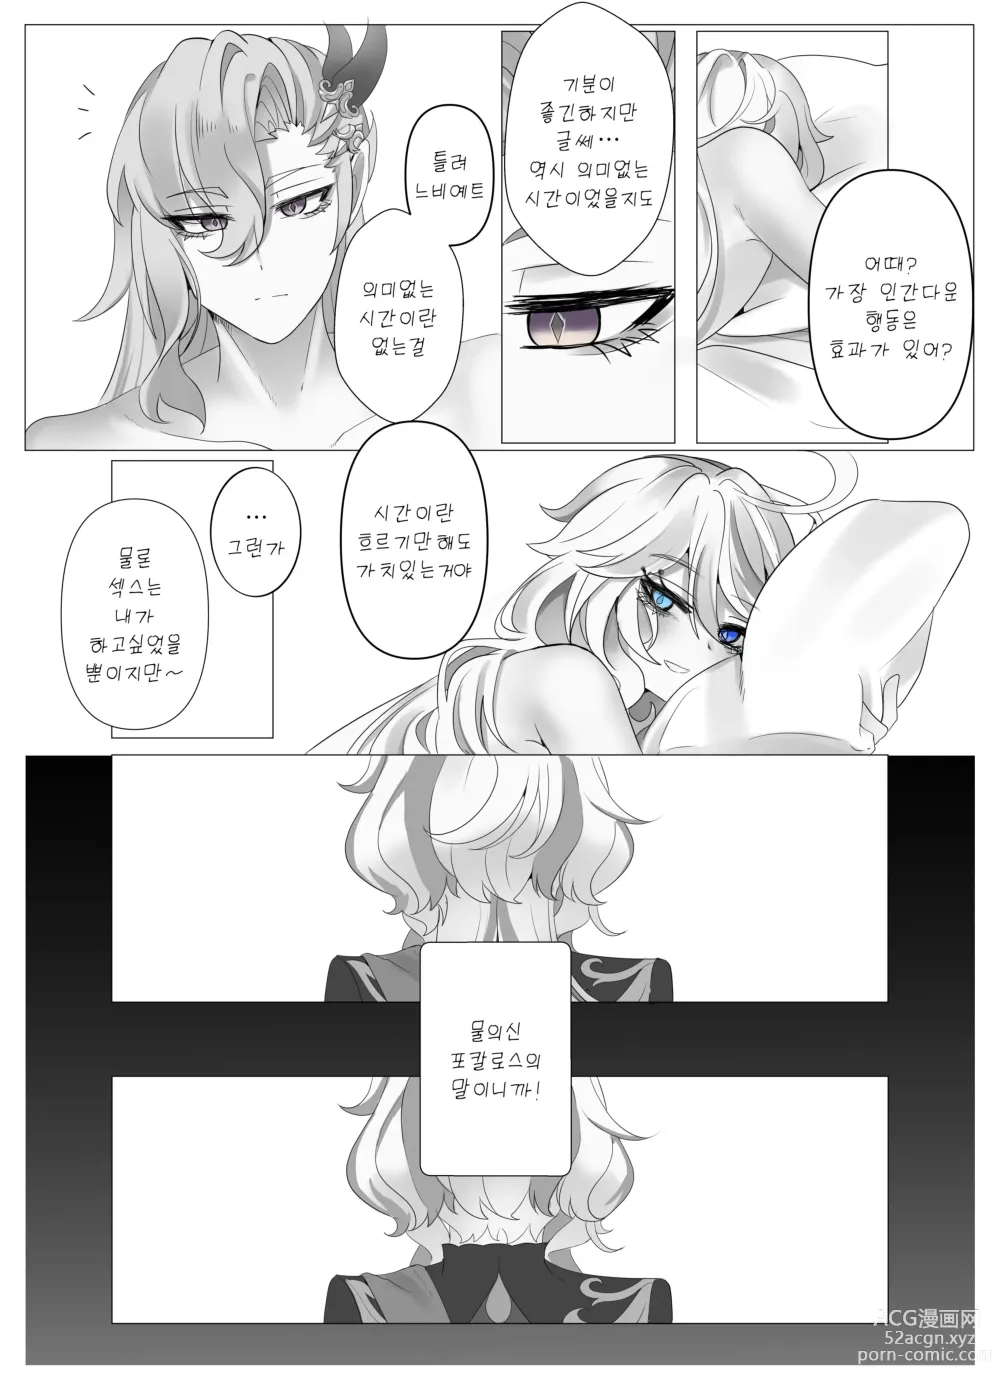 Page 40 of doujinshi Meaningless Time